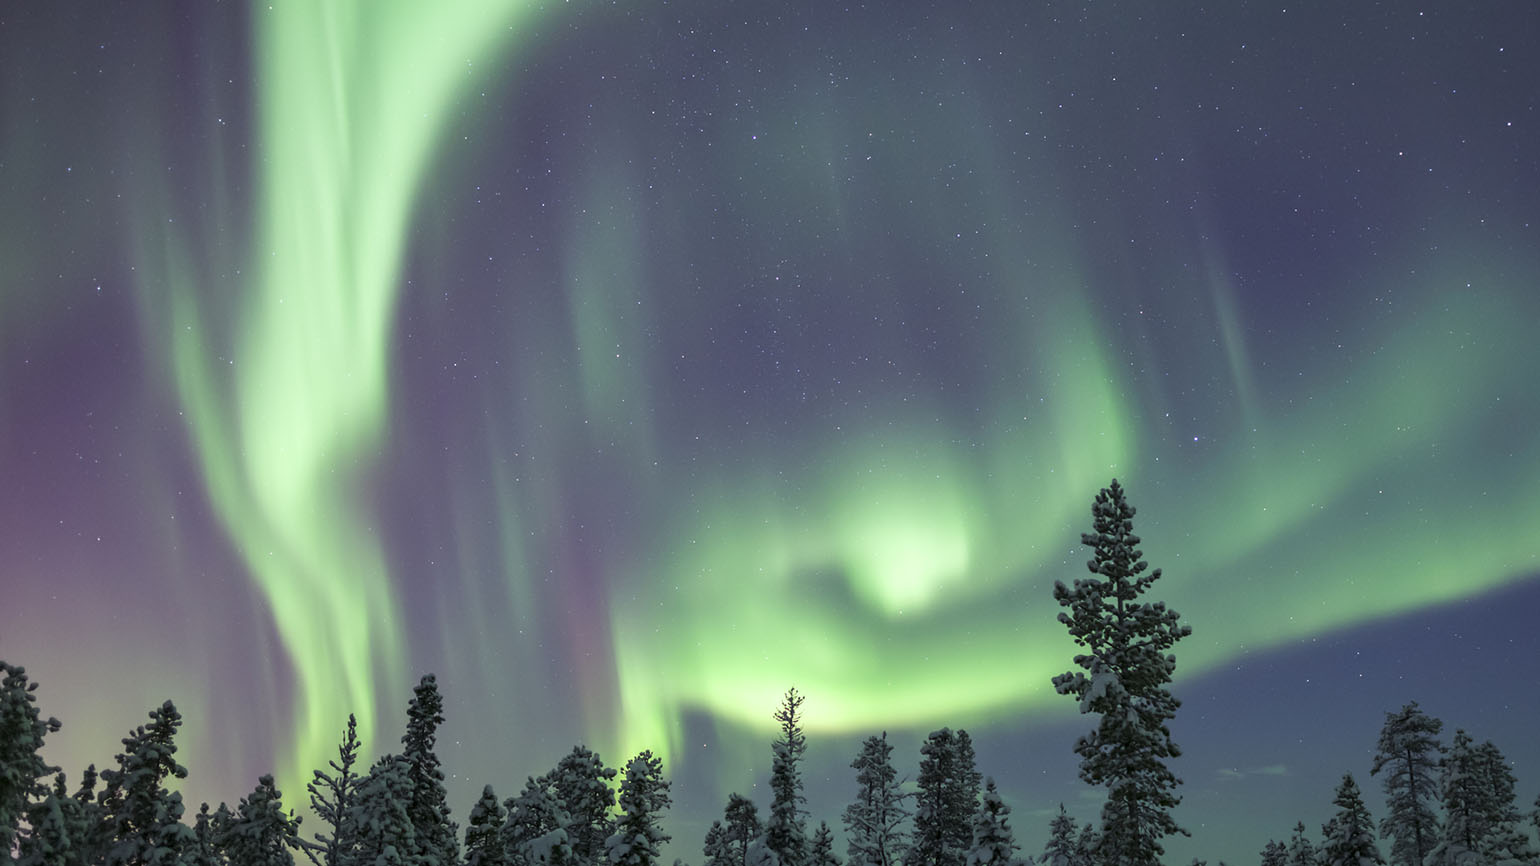 The aurora borealis shines in blues and greens above the trees showing us God's light.